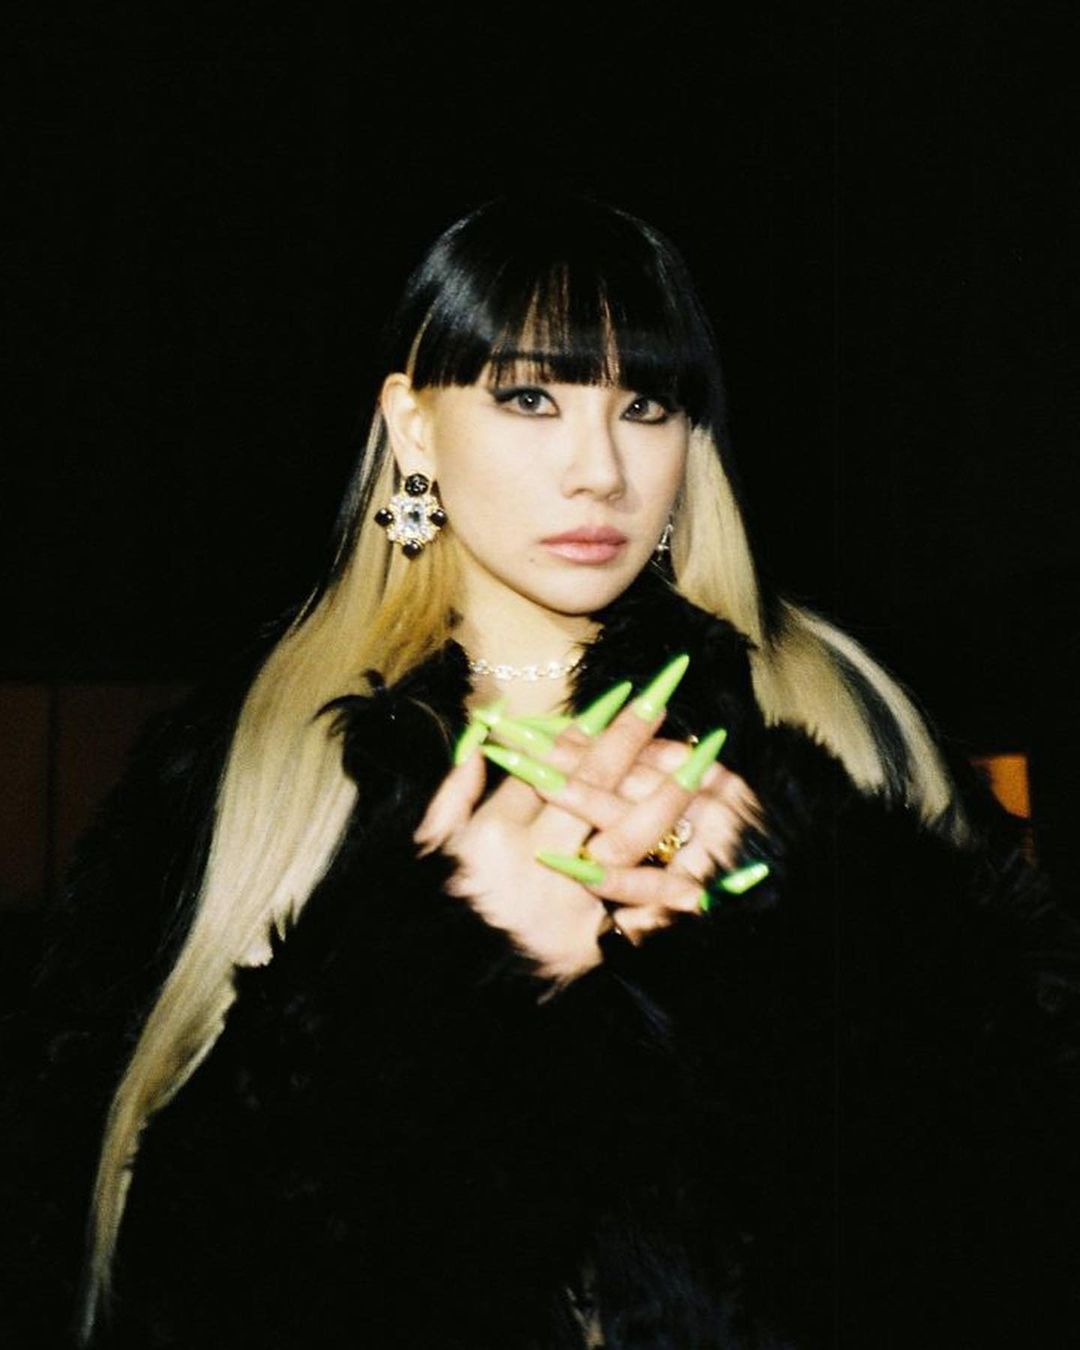 Courtesy of Instagram @chaelincl